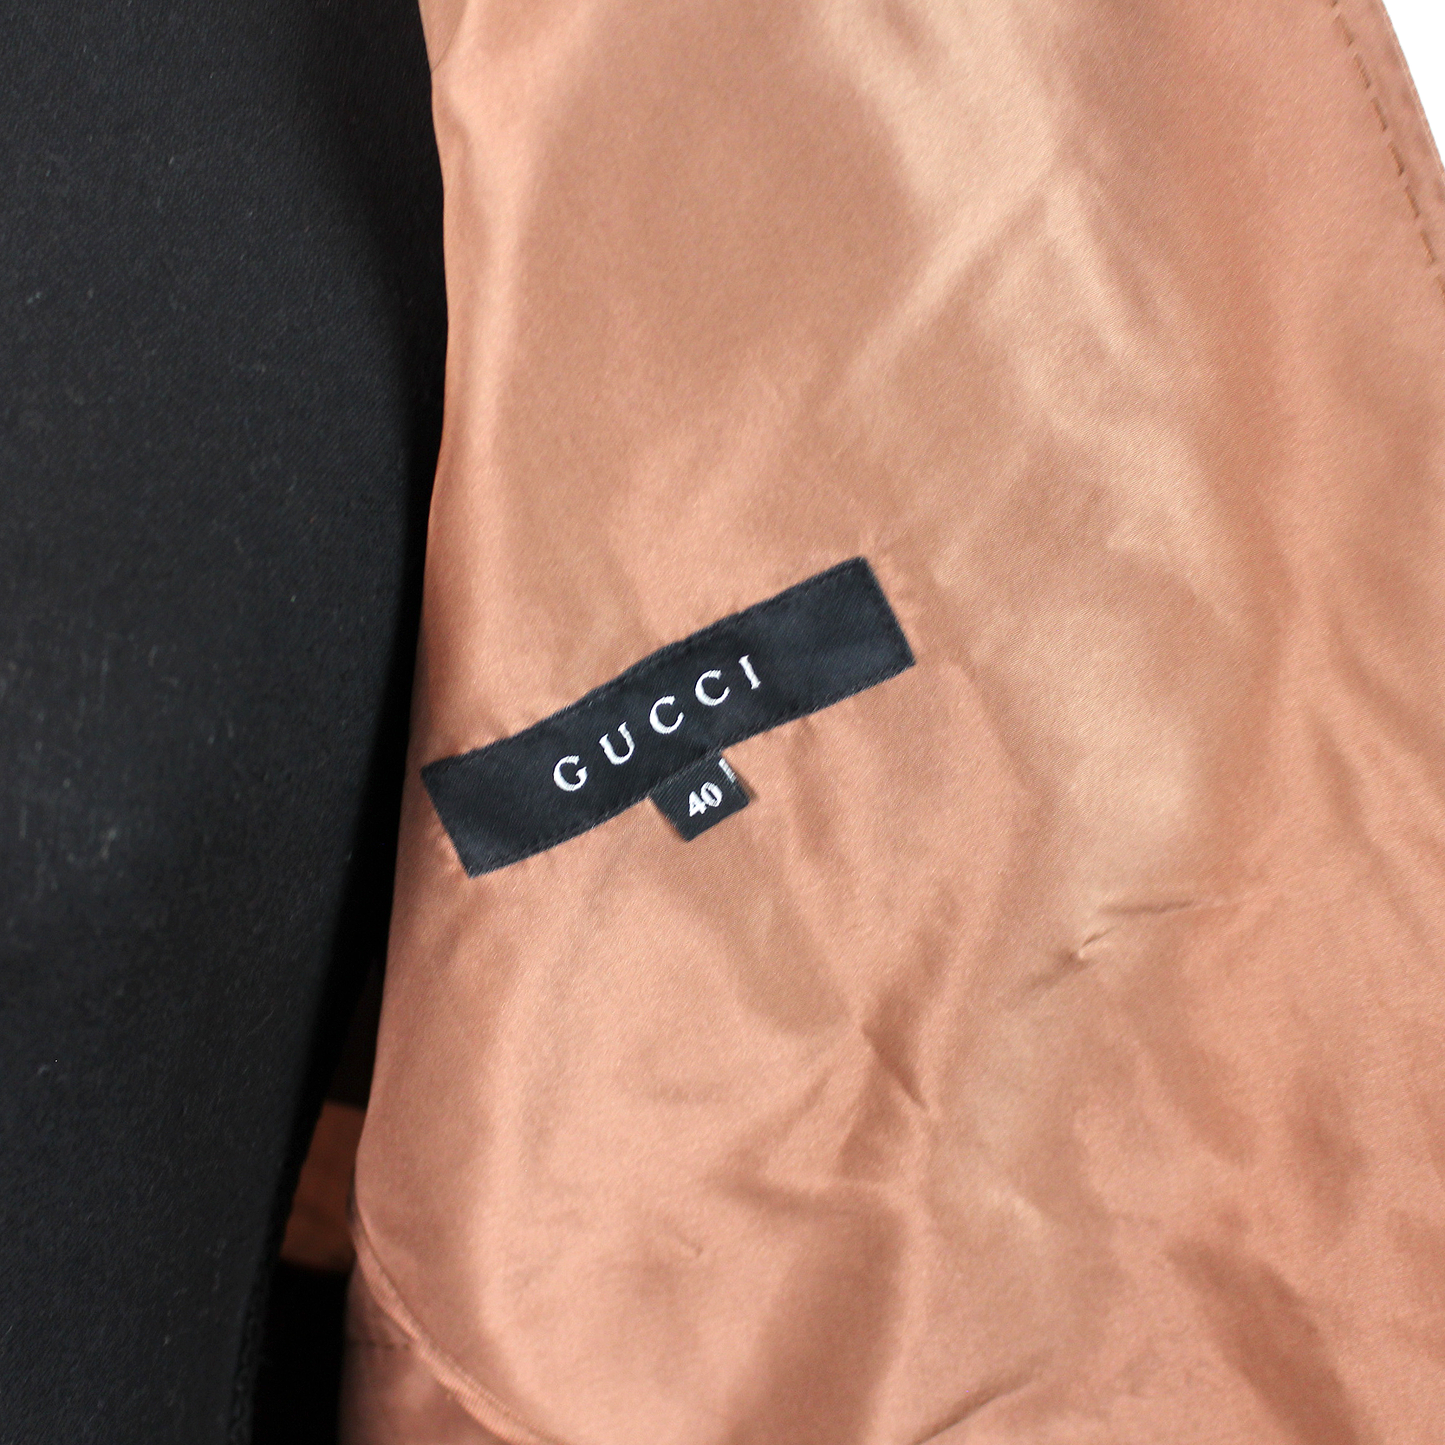 Gucci Silk Belted Utility Jacket